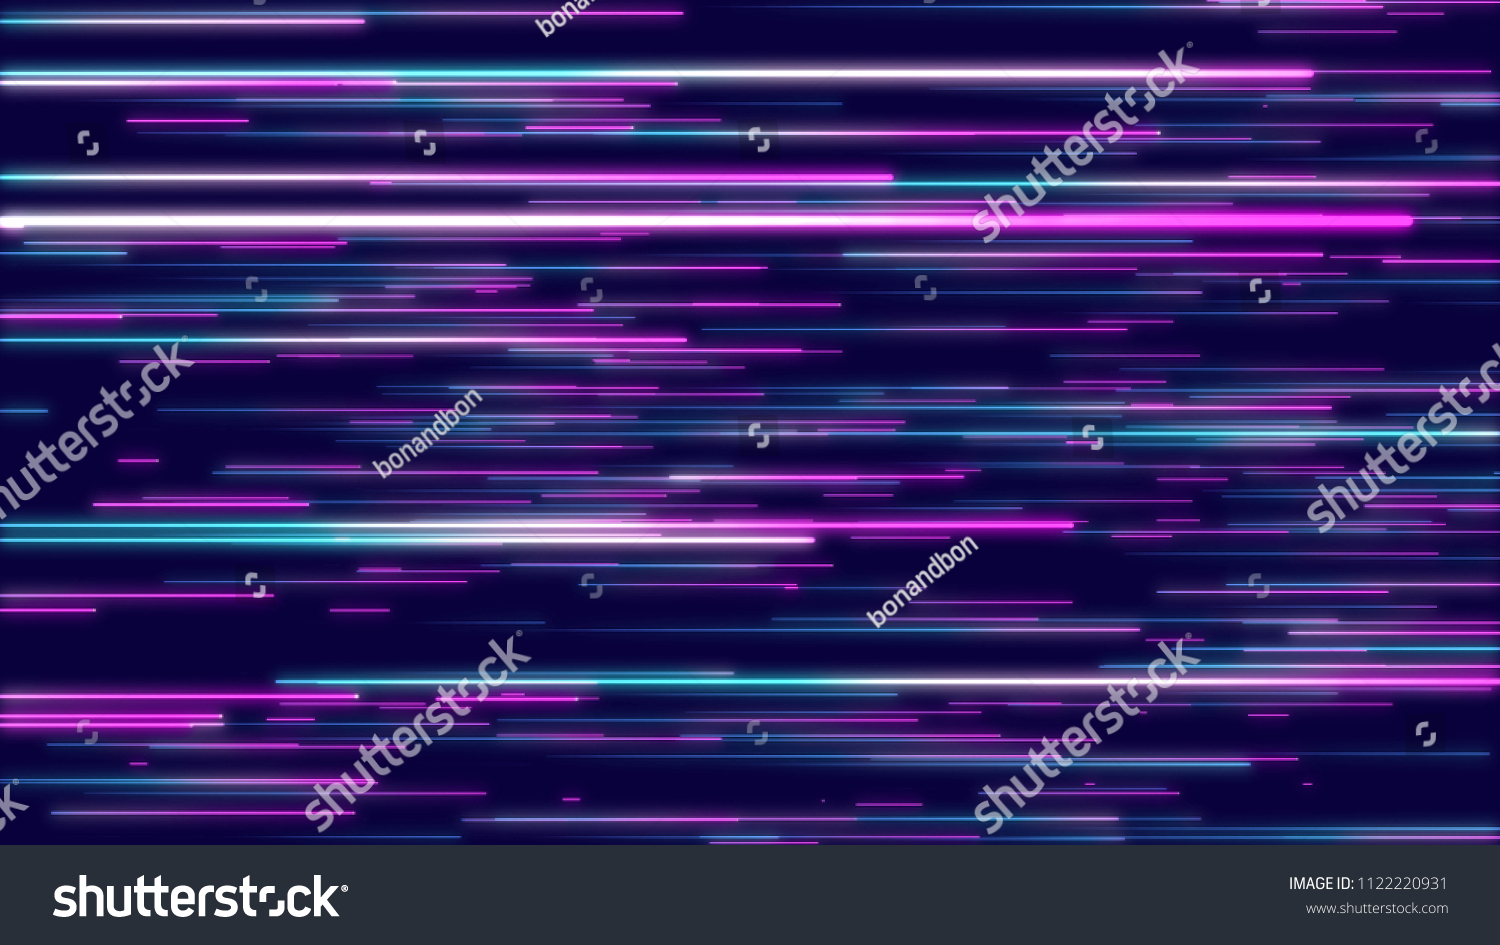 Purple & blue abstract radial lines geometric background. Data flow. Optical fiber. Explosion star. Motion effect. Background #1122220931